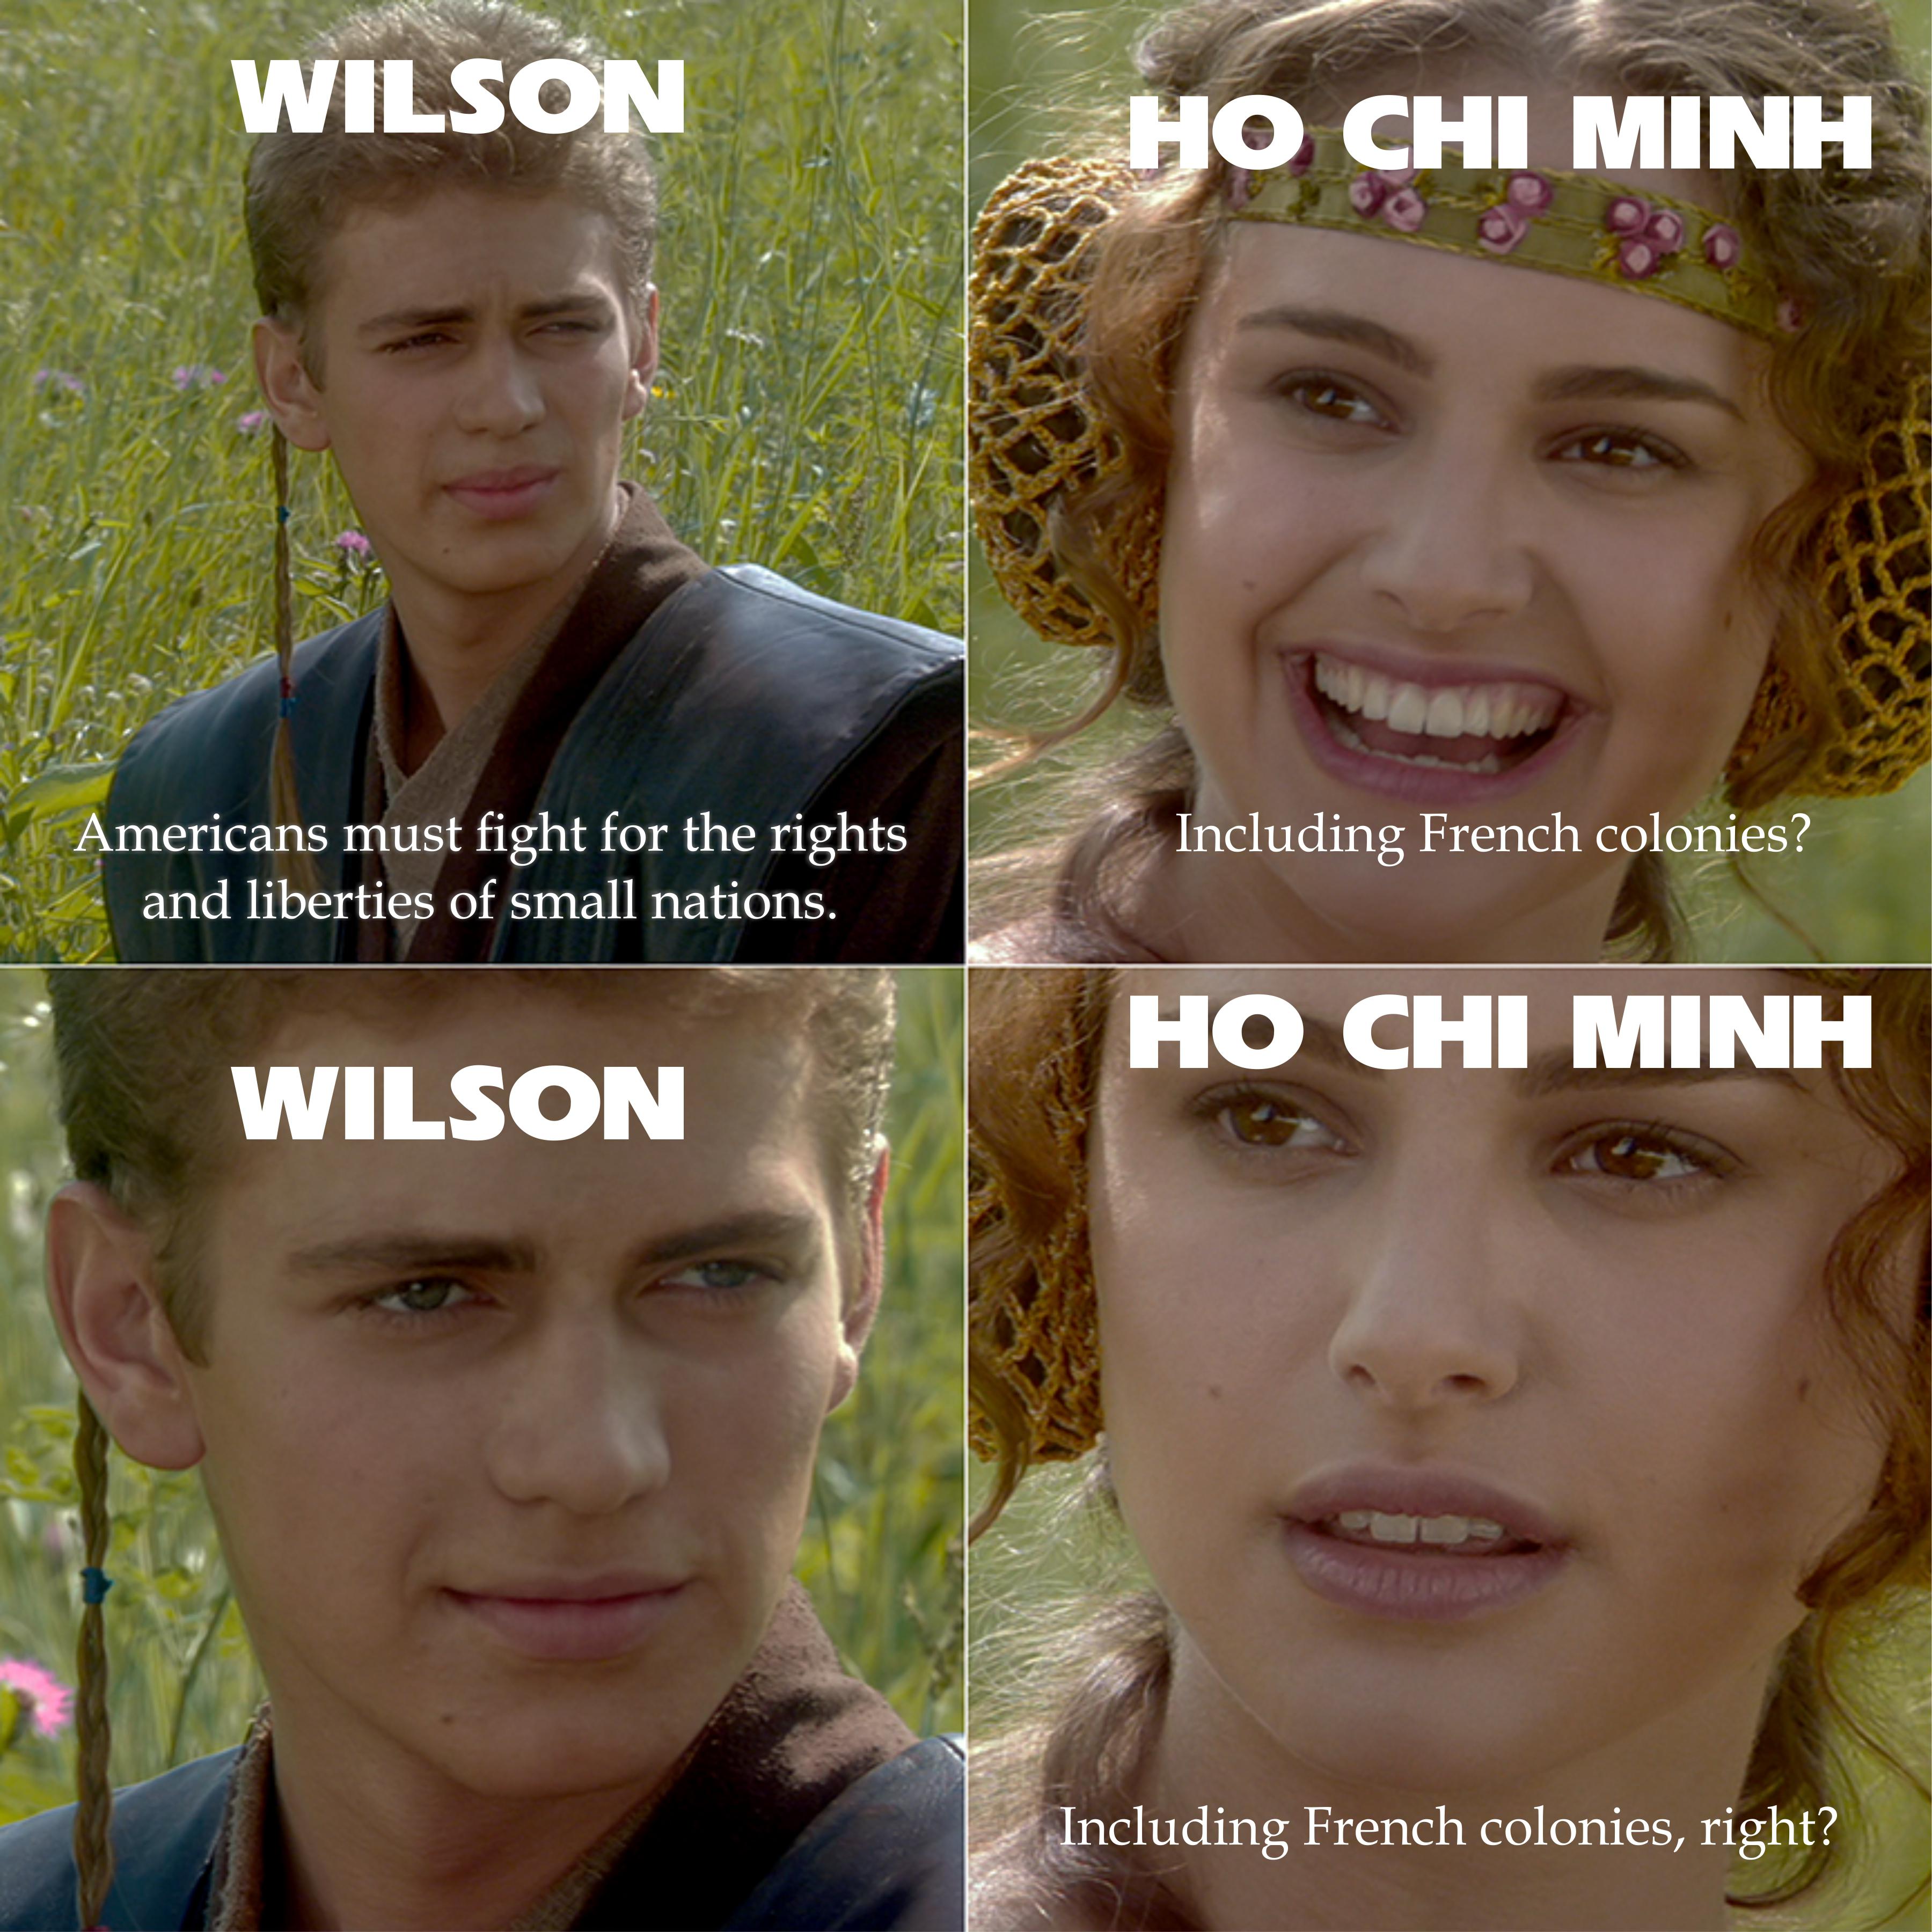 Wilson don't care about Ho Chi Minh